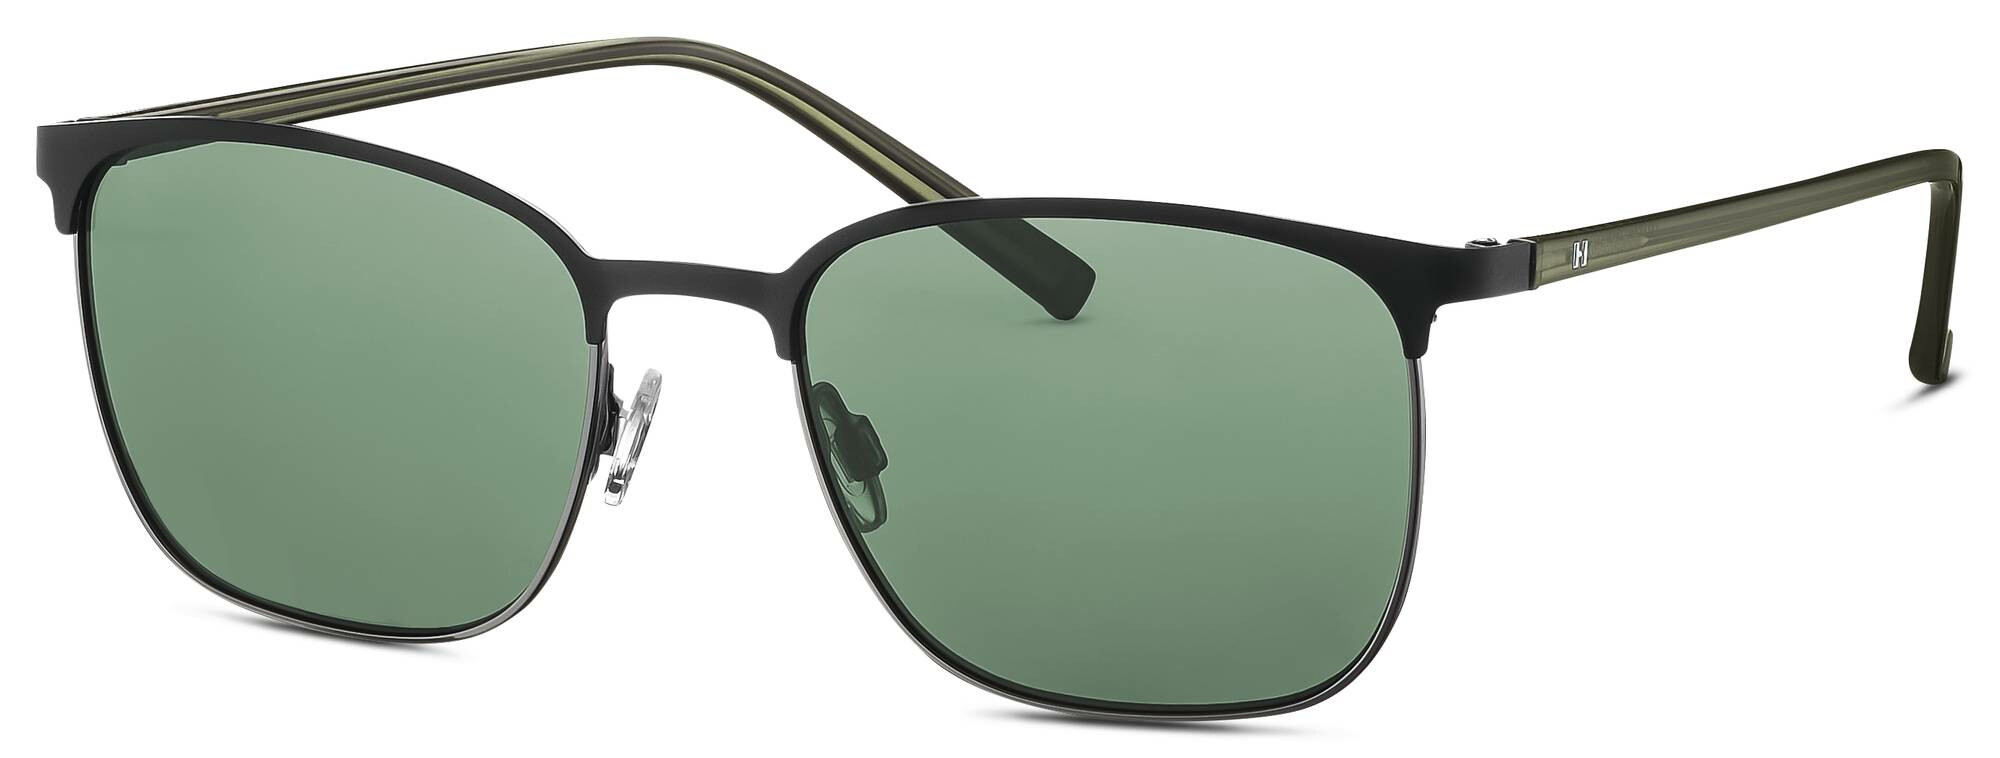 [products.image.front] HUMPHREY´S eyewear 585283 401040 Sonnenbrille